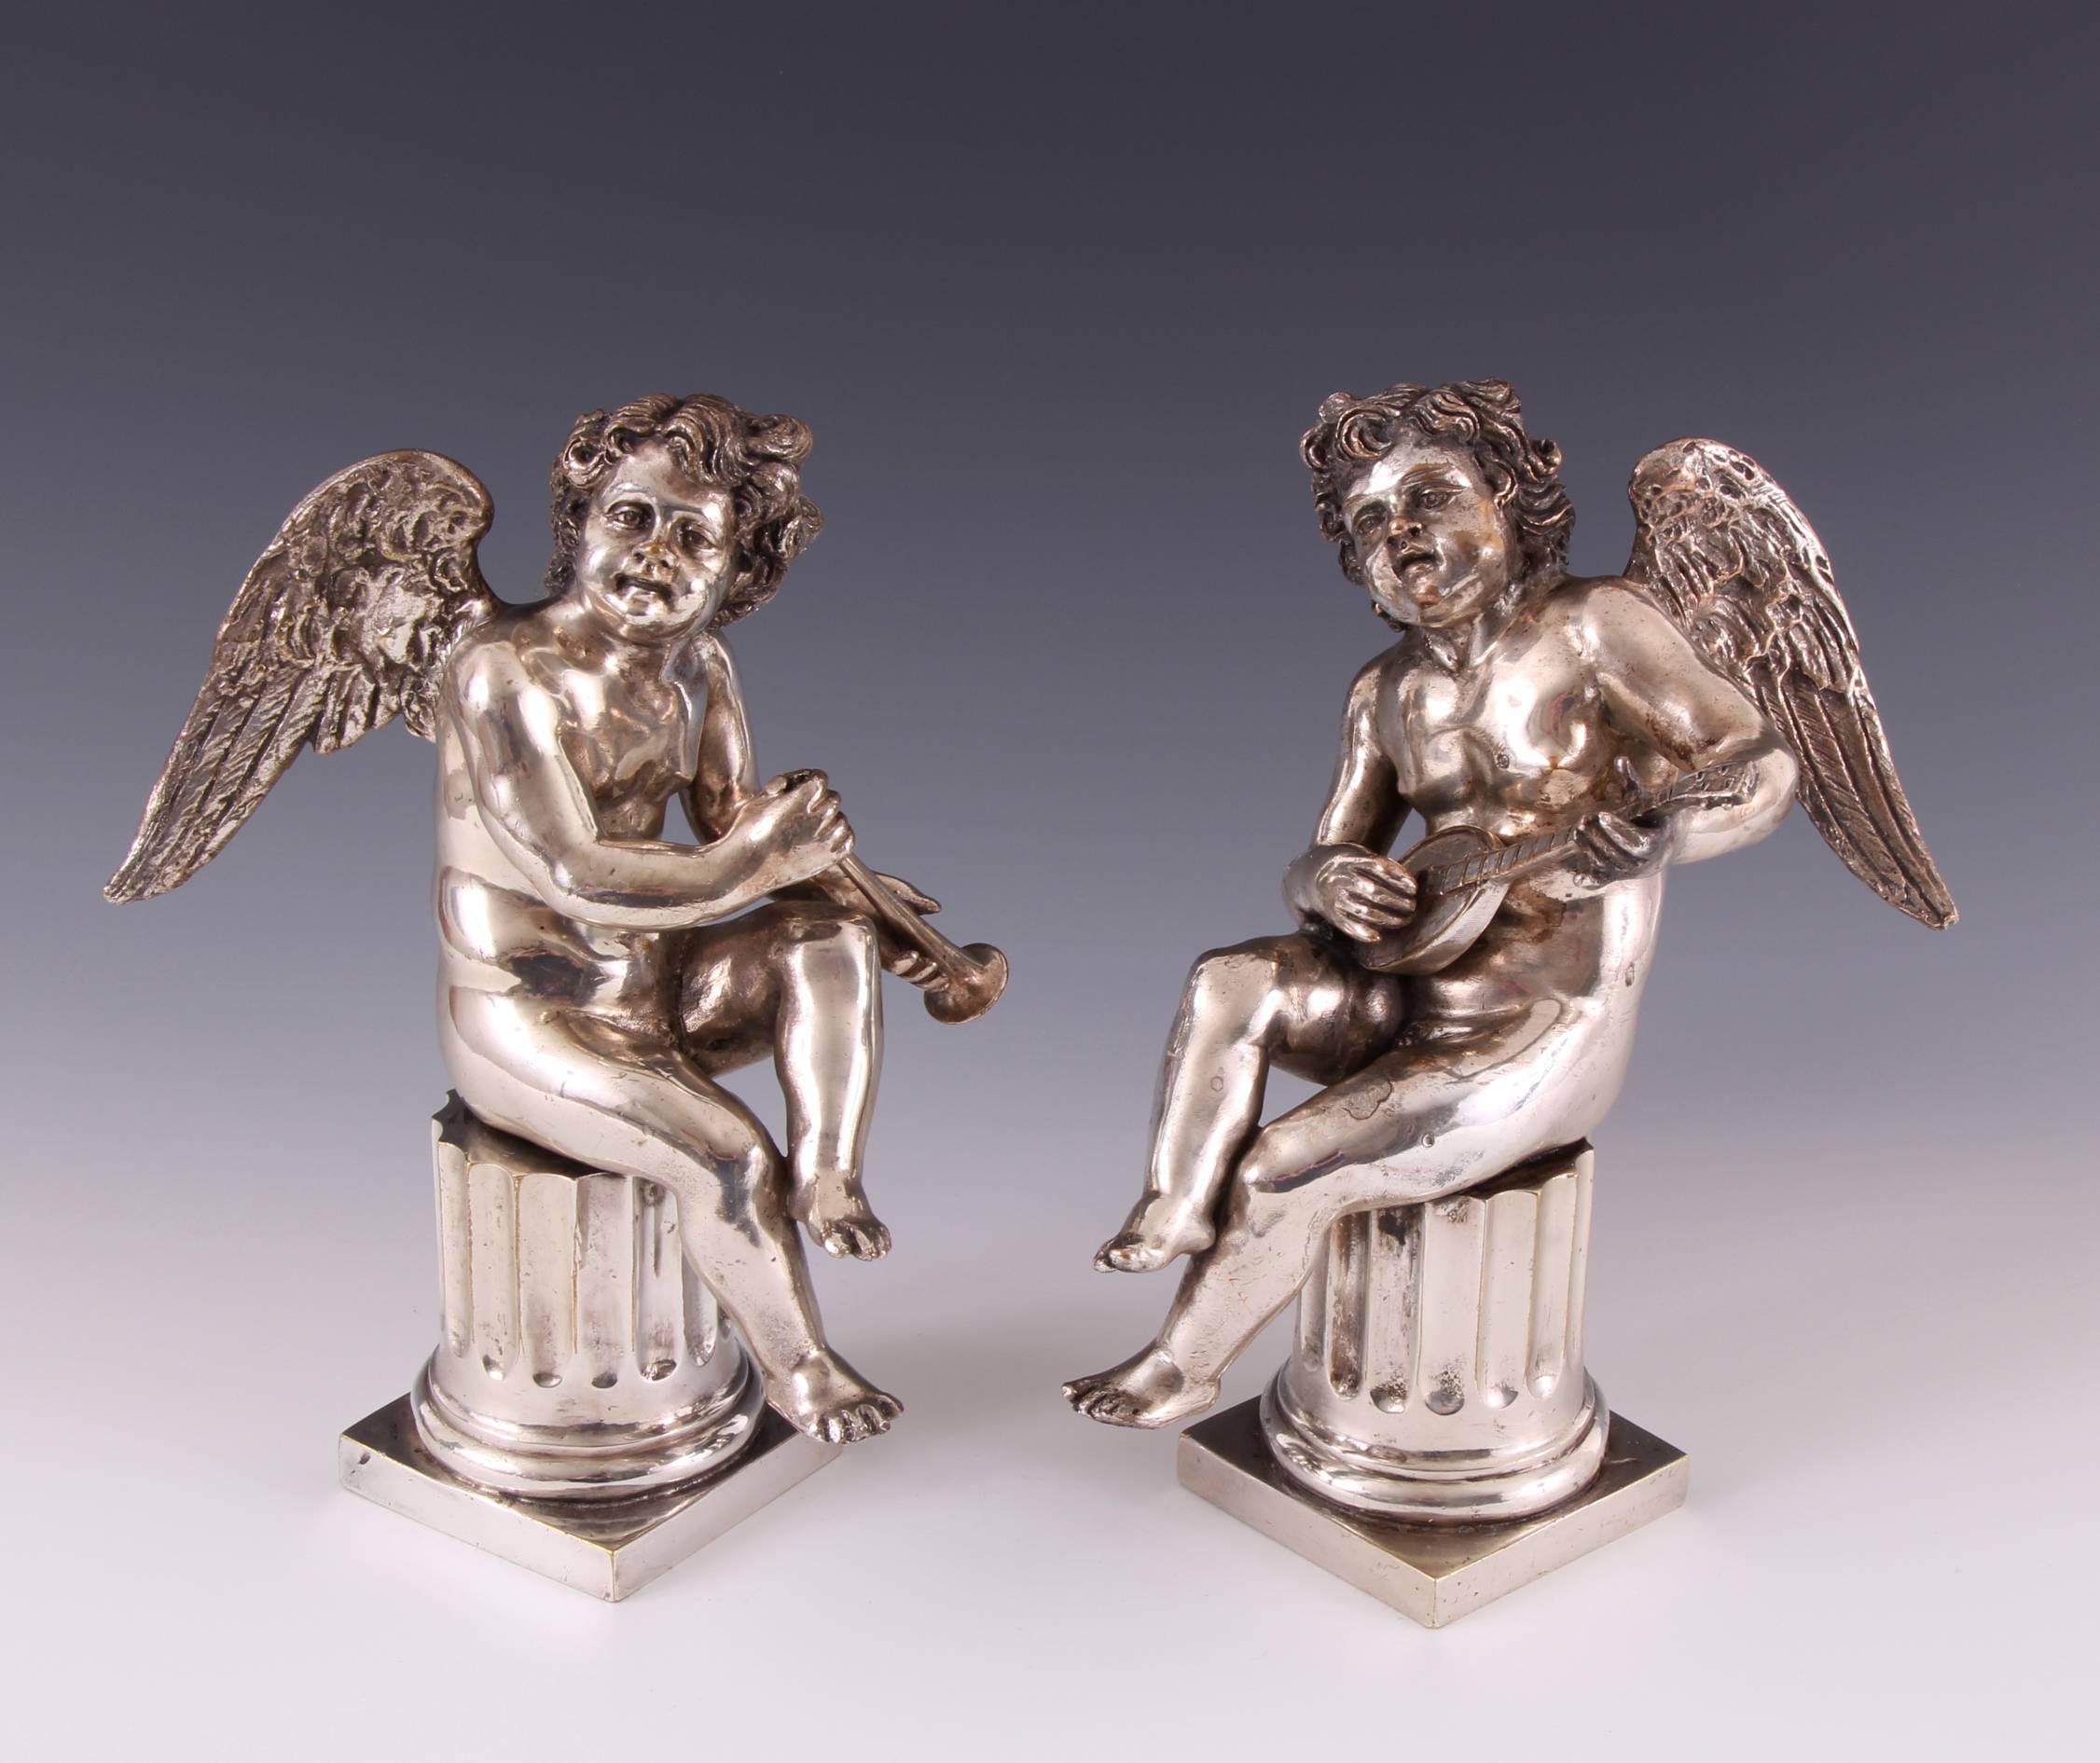 Beautiful pair of 18th century Louis XV silvered bronze musical cherubs on columns. The silvering on these delightful and elegantly sculpted pair exhibits the most wonderful aged color and patina. Each cherub sitting atop a fluted column playing